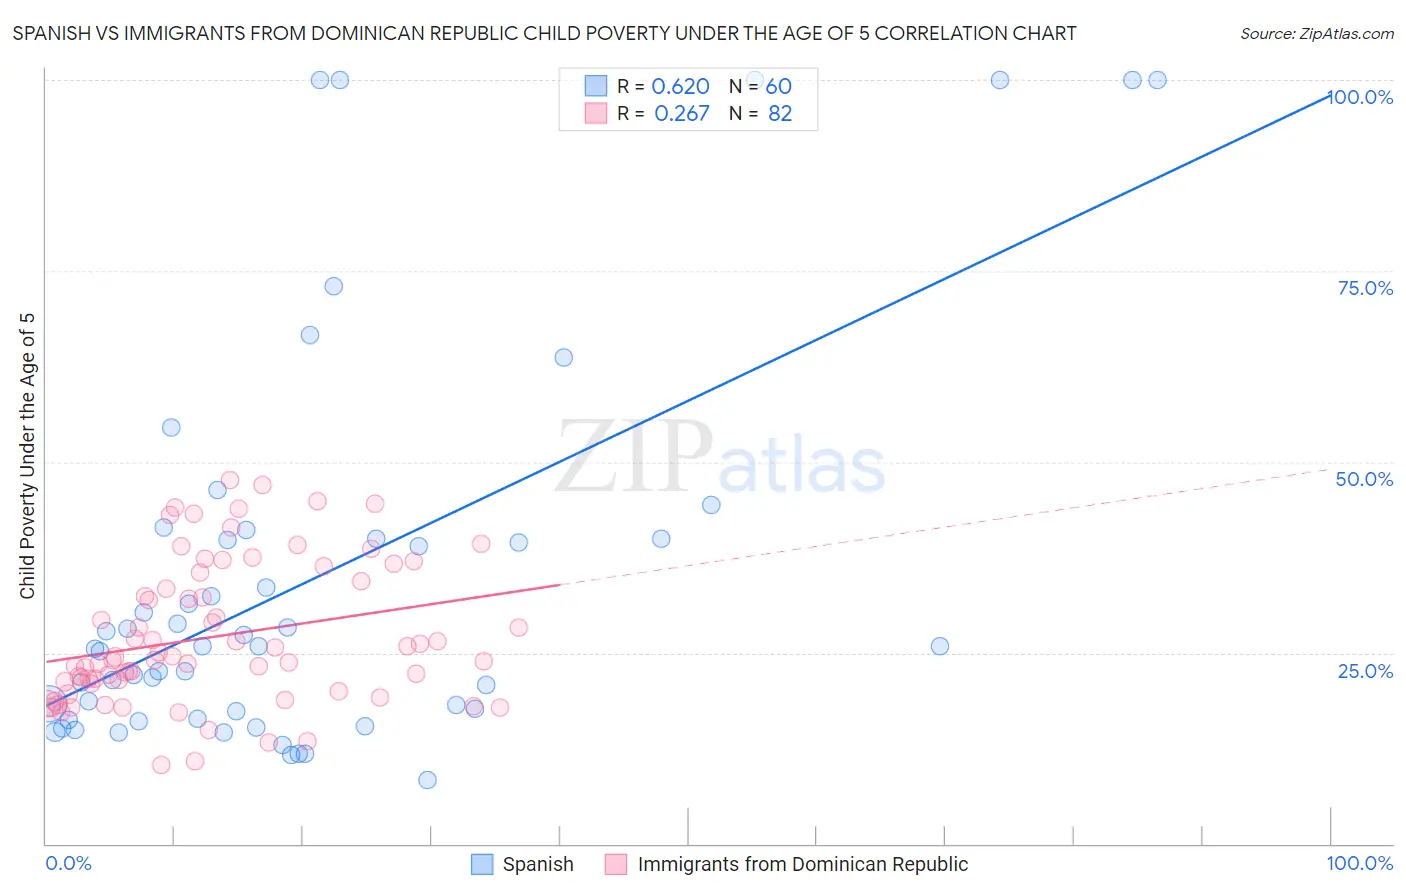 Spanish vs Immigrants from Dominican Republic Child Poverty Under the Age of 5